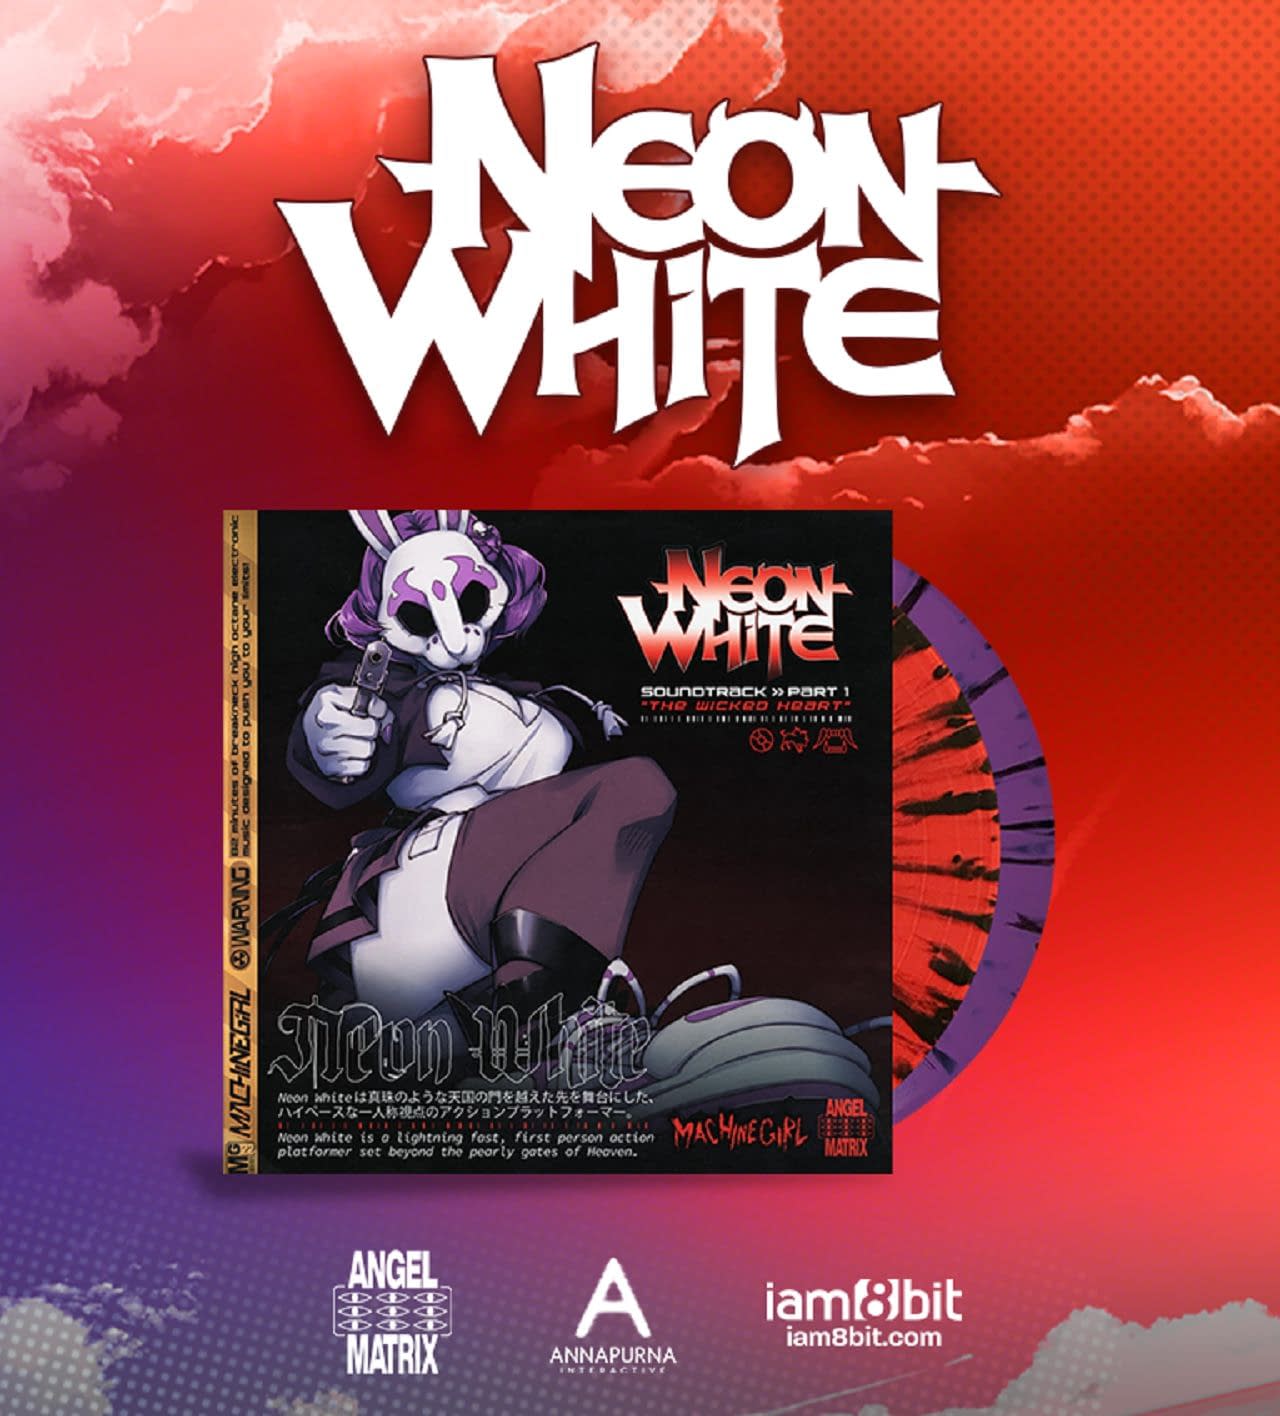 Neon White Will Be Getting Two New Vinyl Soundtrack Releases